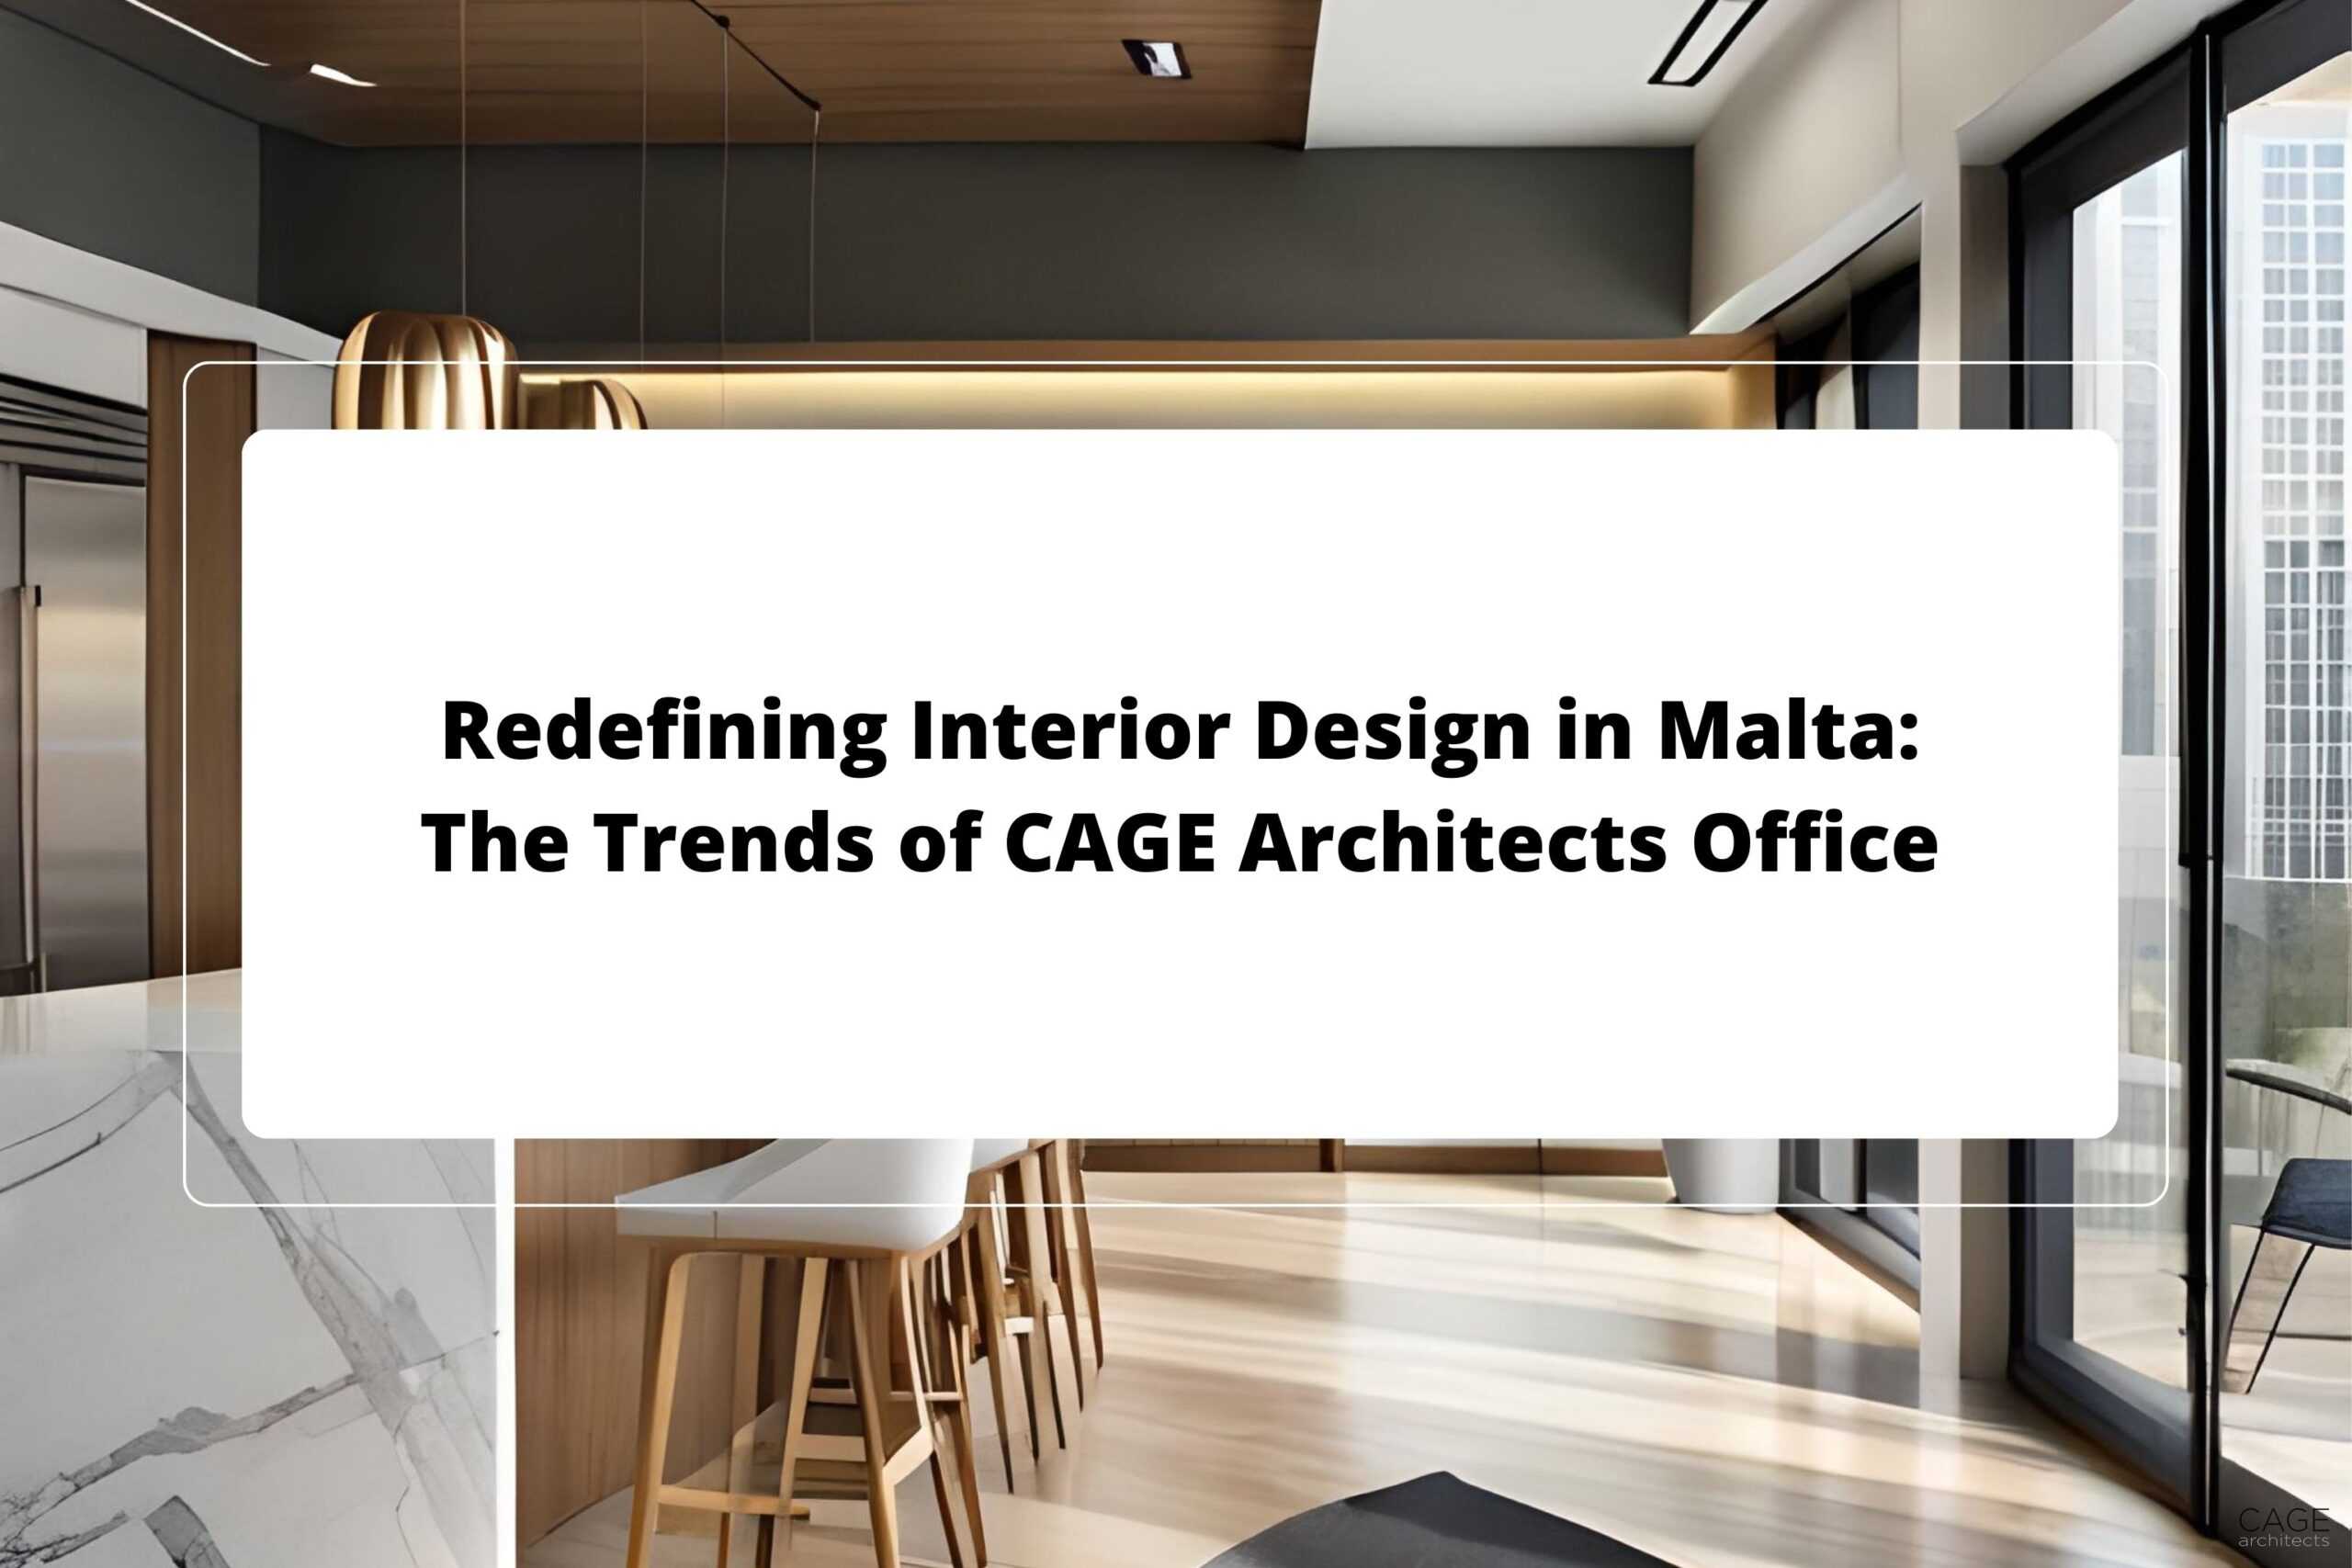 Redefining Interior Design in Malta: The Trends of CAGE Architects Office